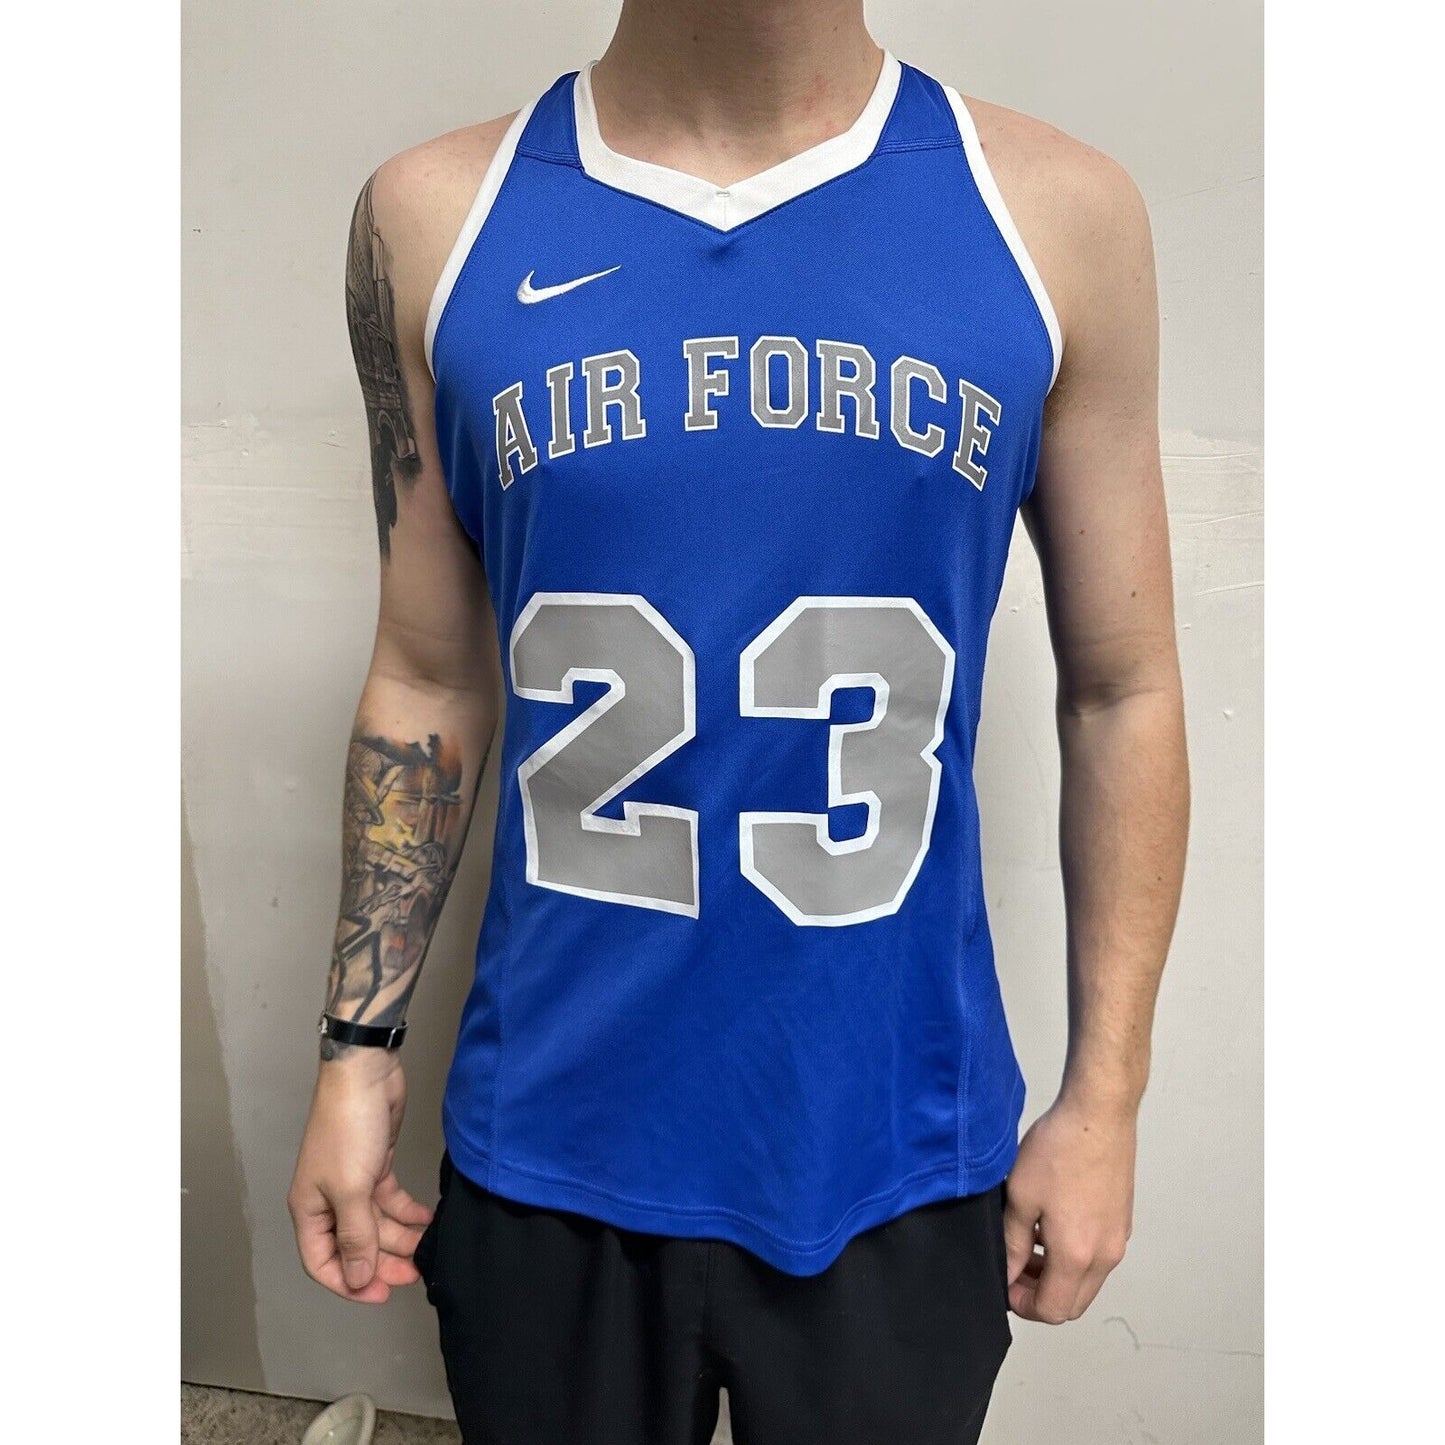 Men’s  Large Nike Dri-fit USAFA Air Force Academy Jersey Tank Top Athletic